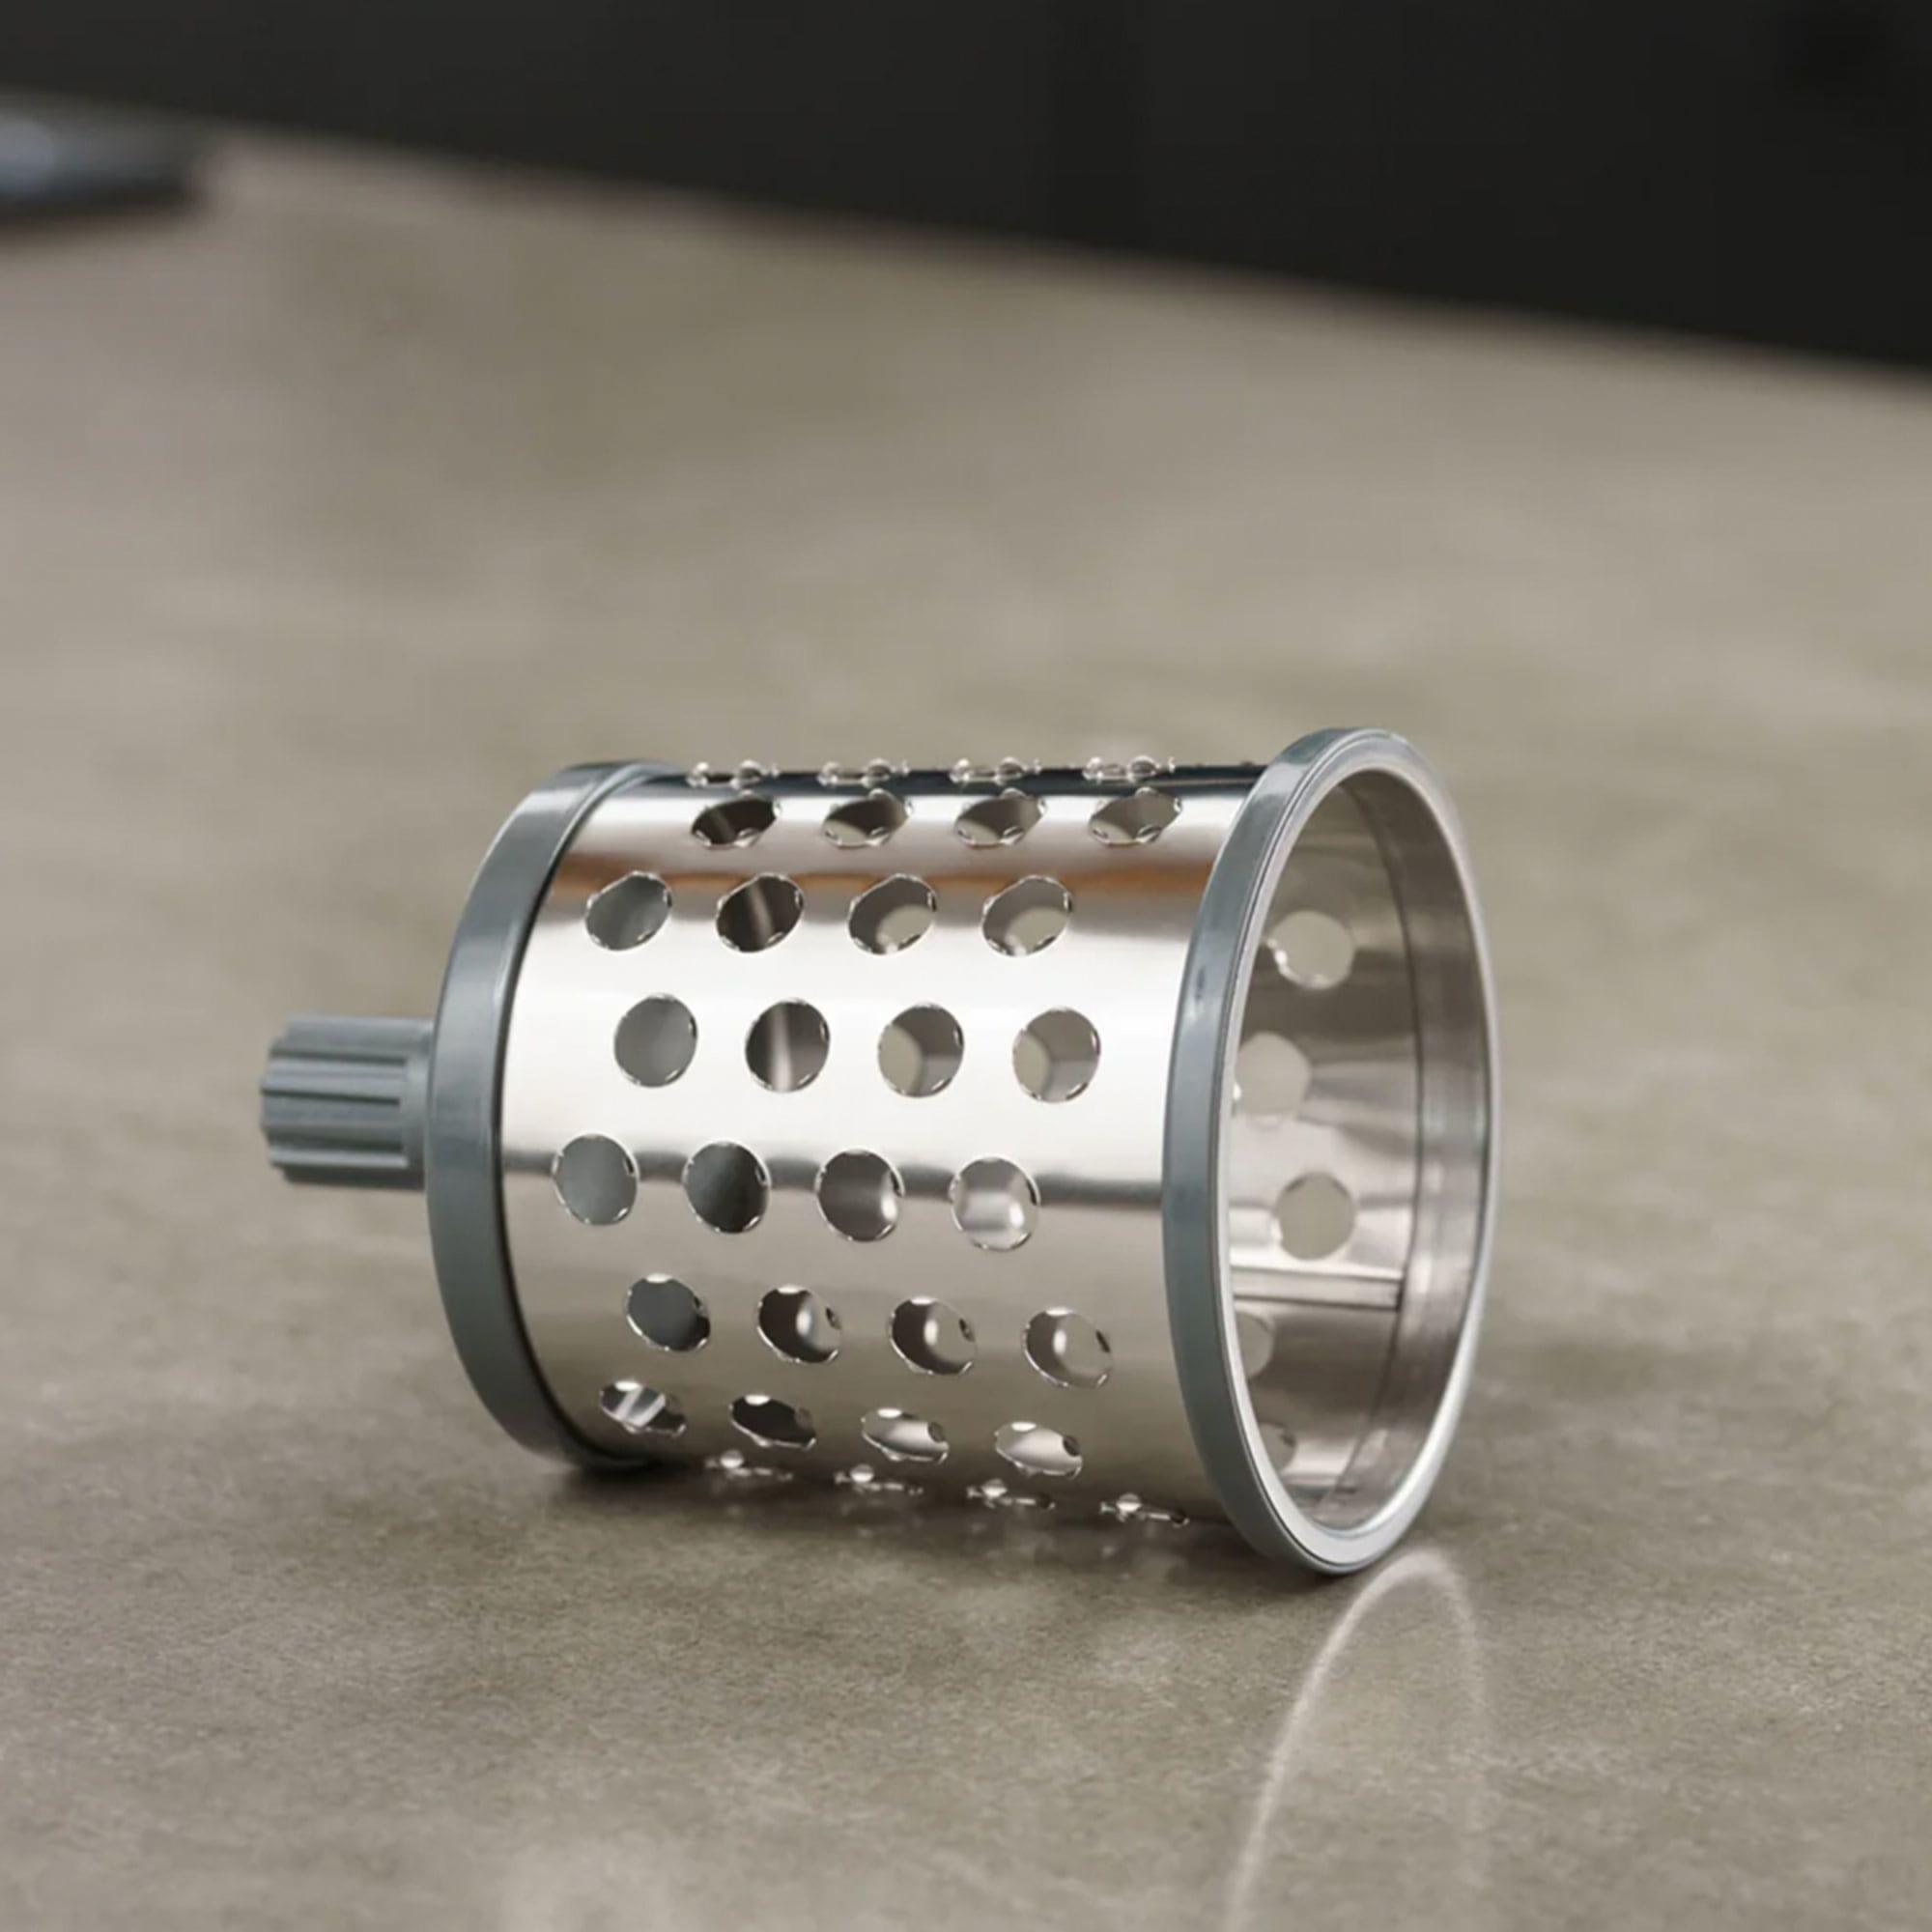 Zyliss Puree Drum Grater Image 3